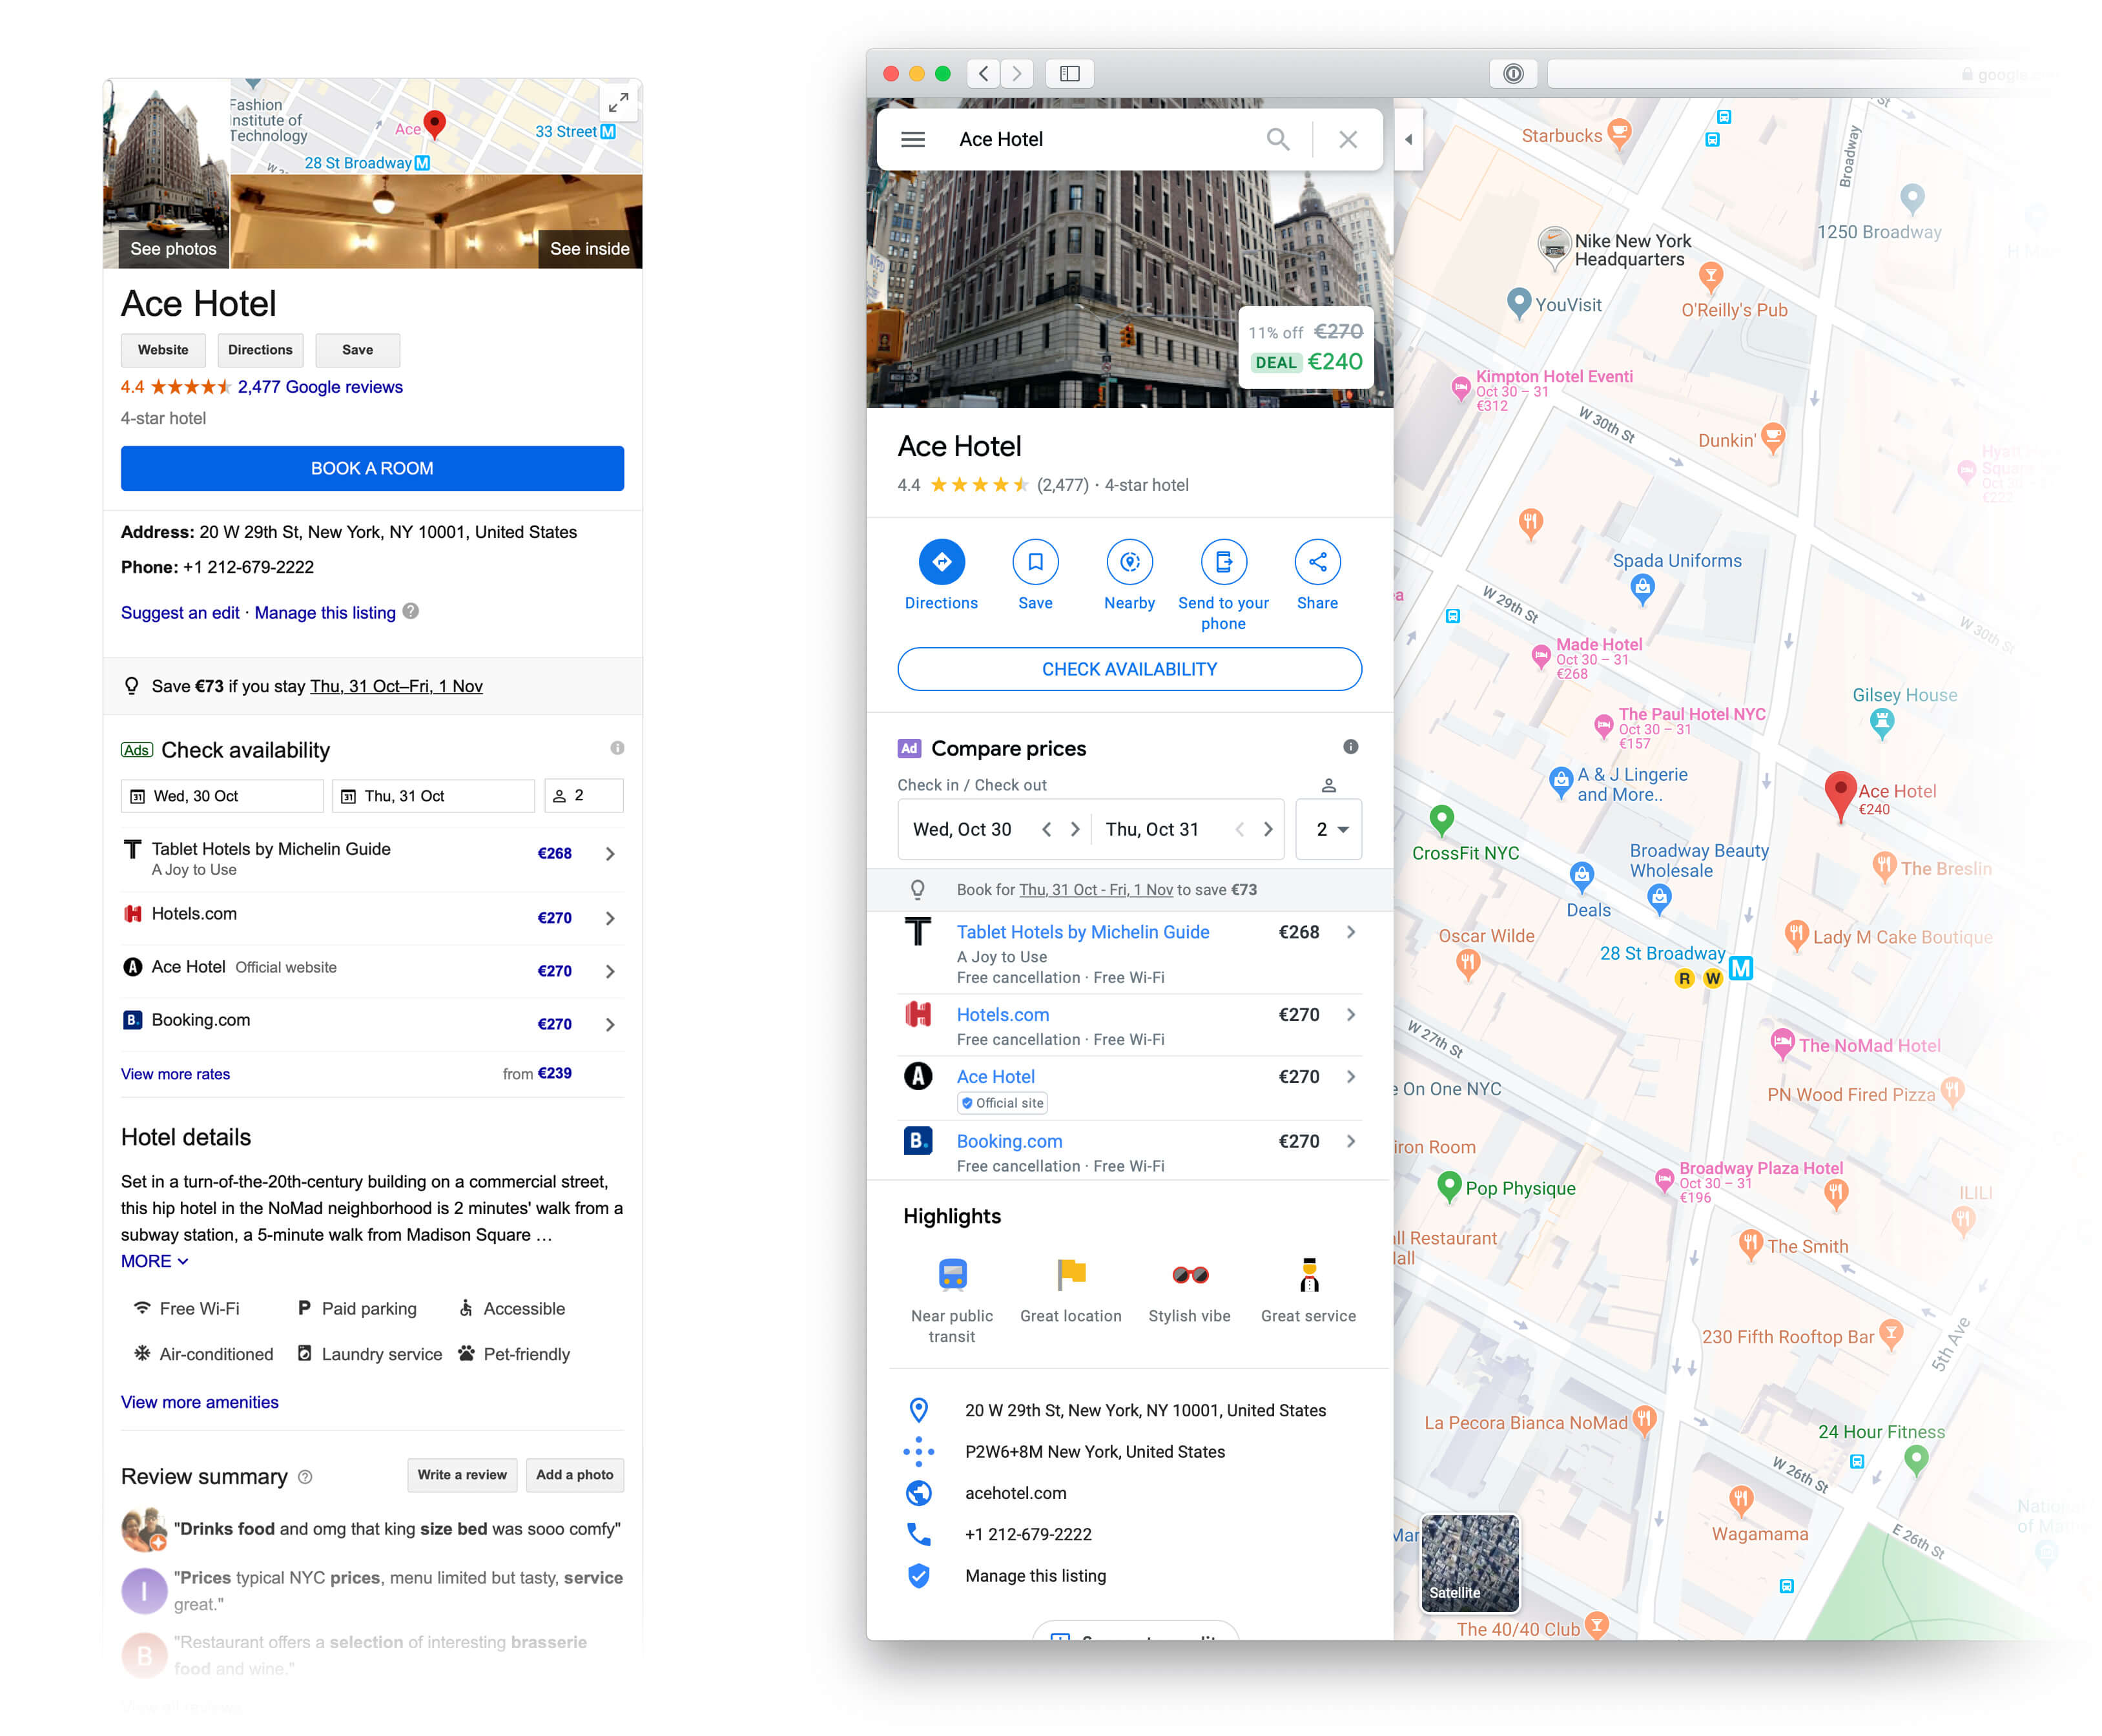 Ace Hotel New York as it appears in the Google Knowledge Graph (left) mirrors their property information as it appears on Google Maps (right).